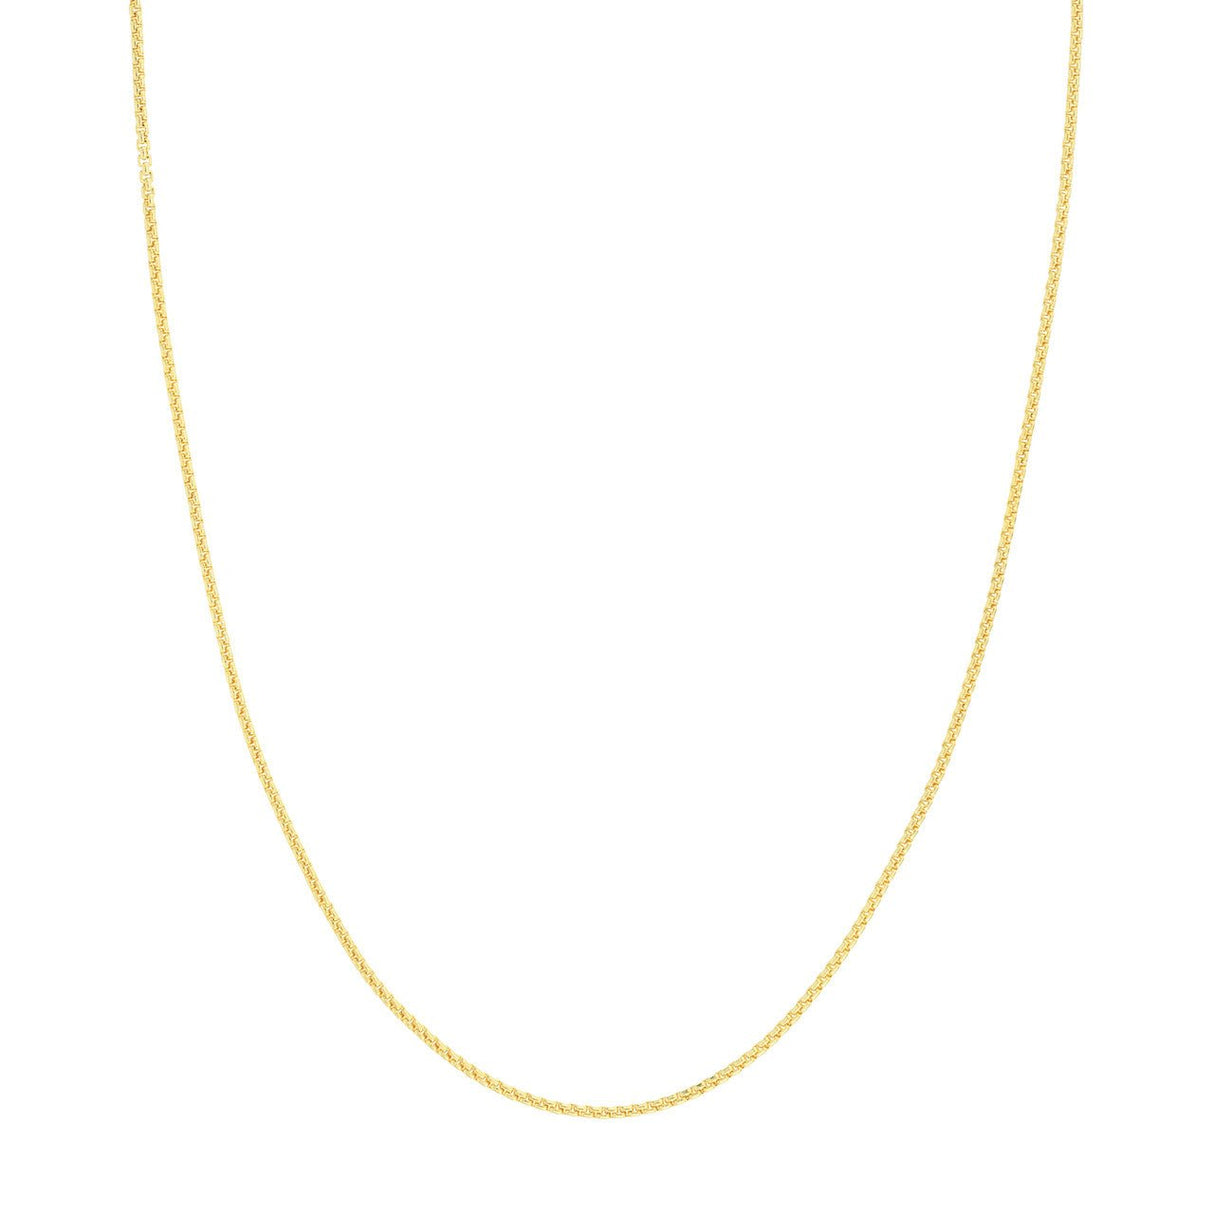 14K Gold Chain, 20", 1.75mm Solid Round Box Chain with Lobster Lock, Gold Layered Chain, Gold Chine Necklace, - Diamond Origin